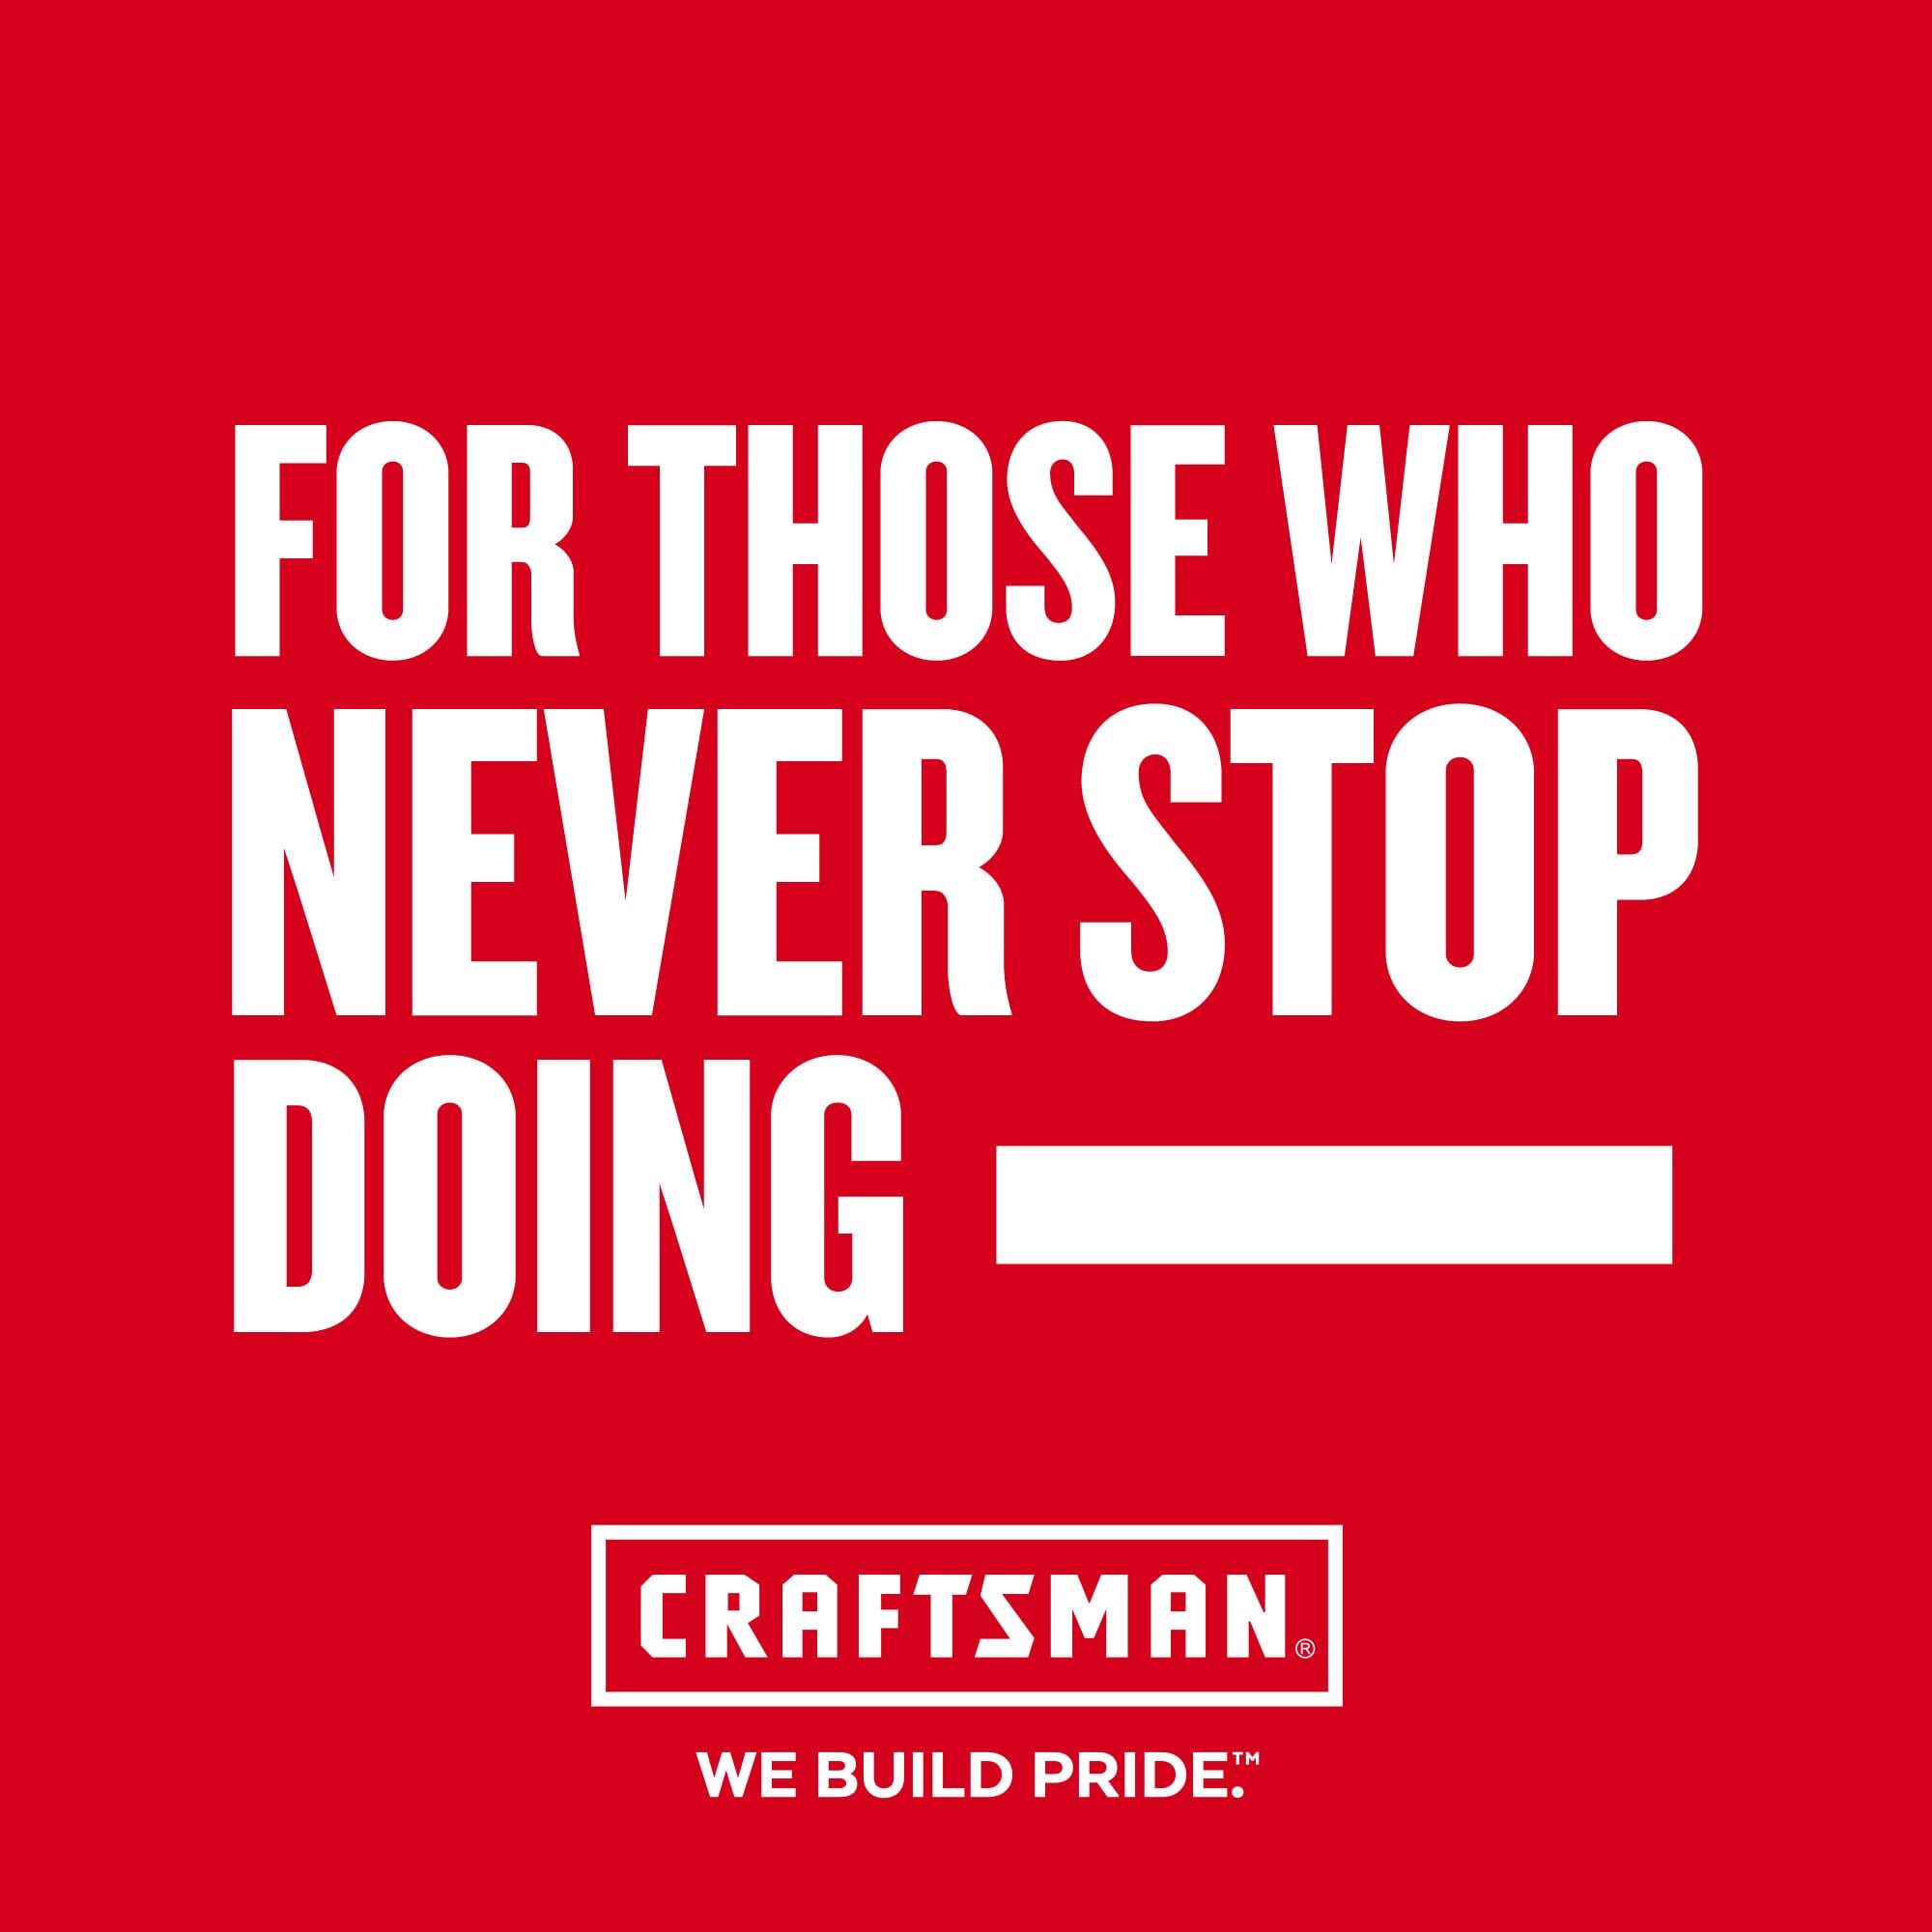 Graphic of CRAFTSMAN String Trimmers highlighting product features